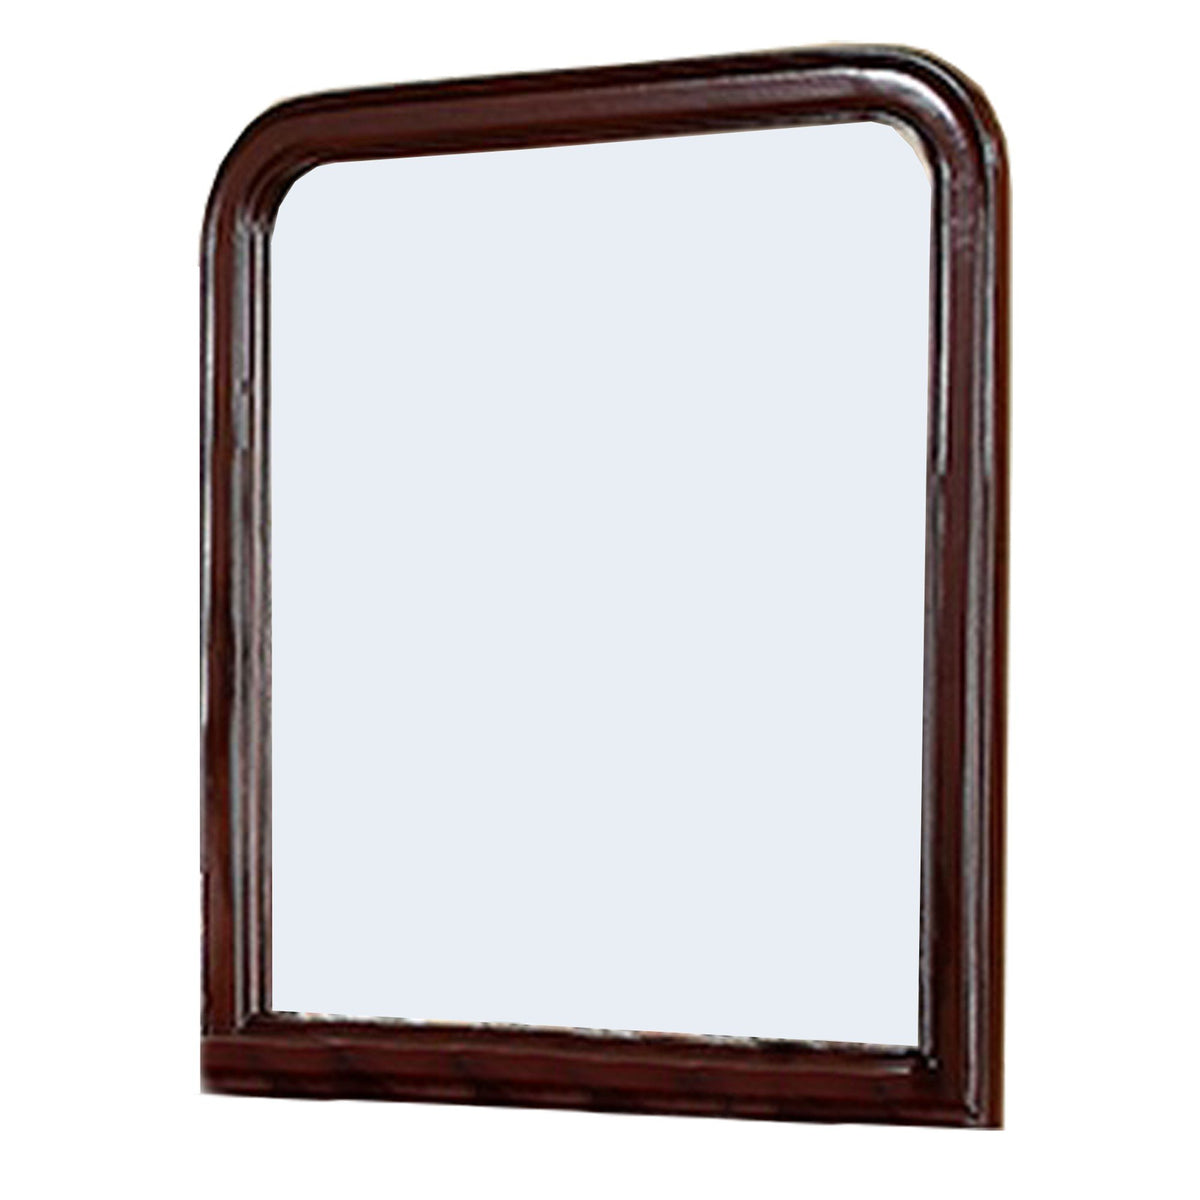 37 Inches Wooden Mirror with Curved Edges, Brown - BM232118